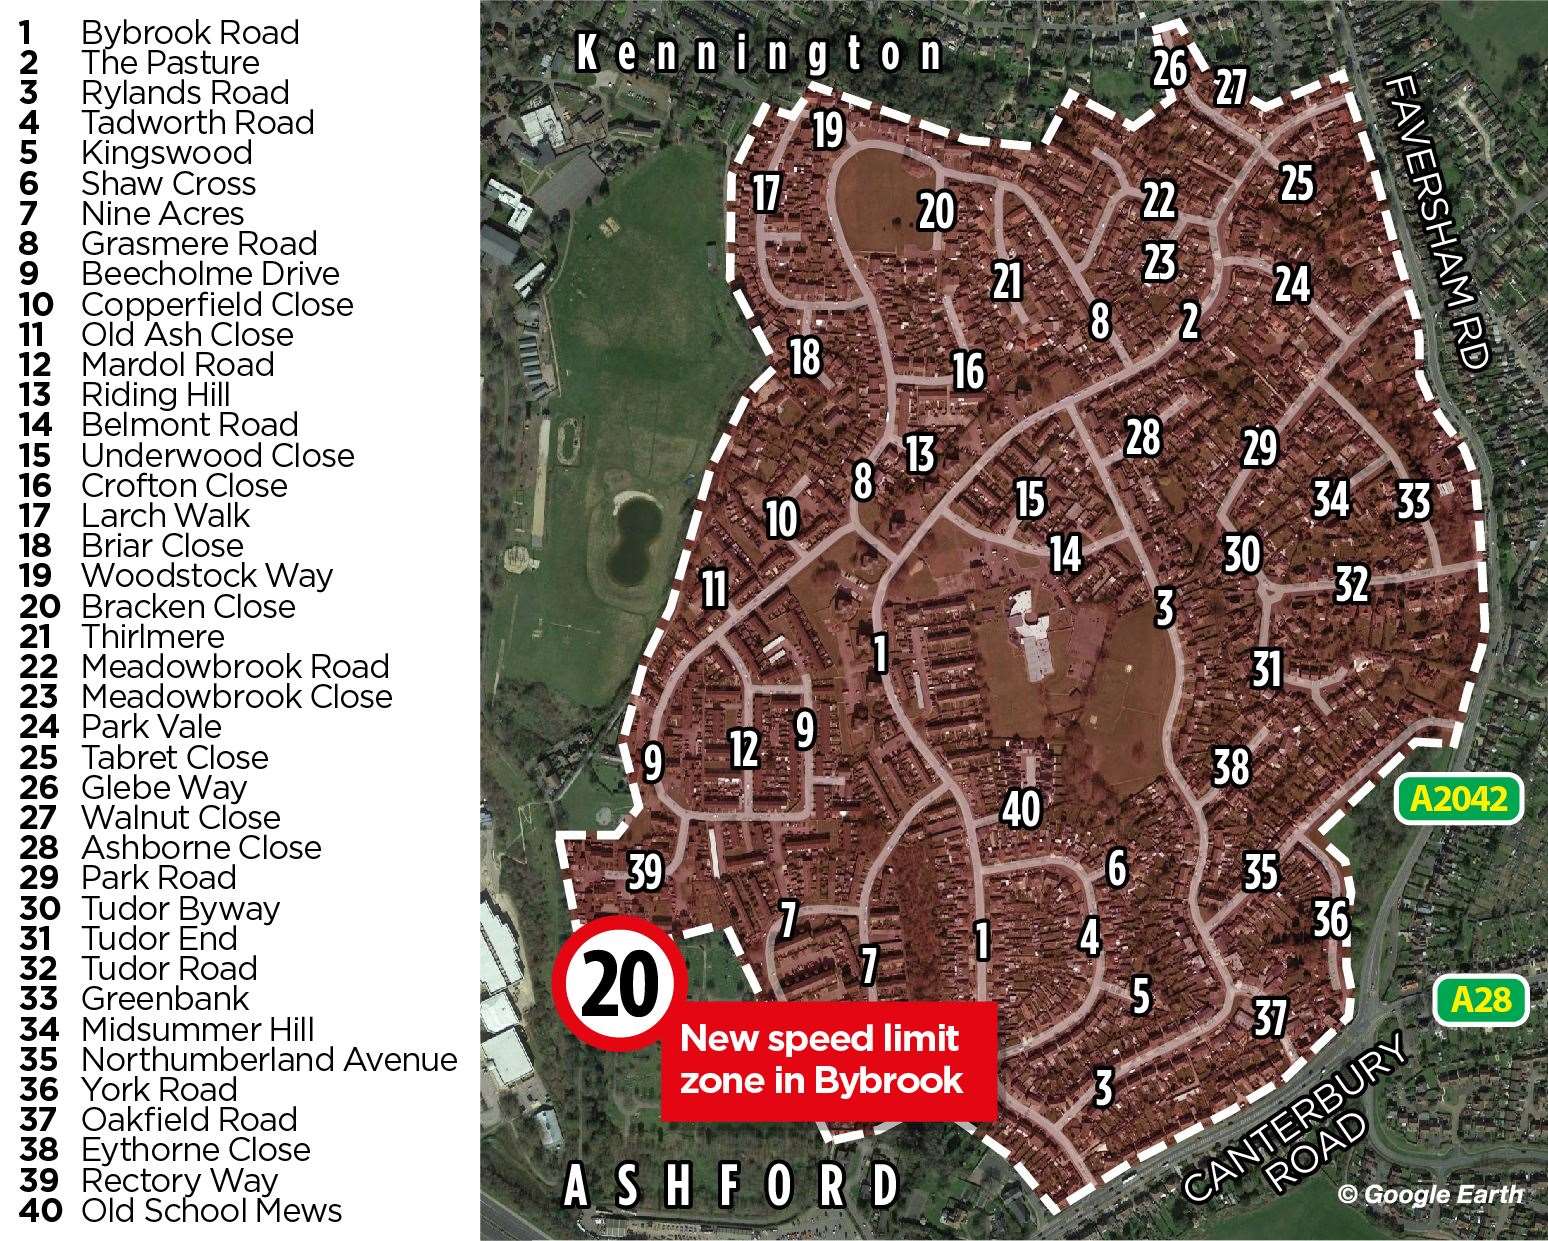 The 40 roads that will see changes in Kennington, Bybrook and Bockhanger; the area is currently covered by a 30mph limit